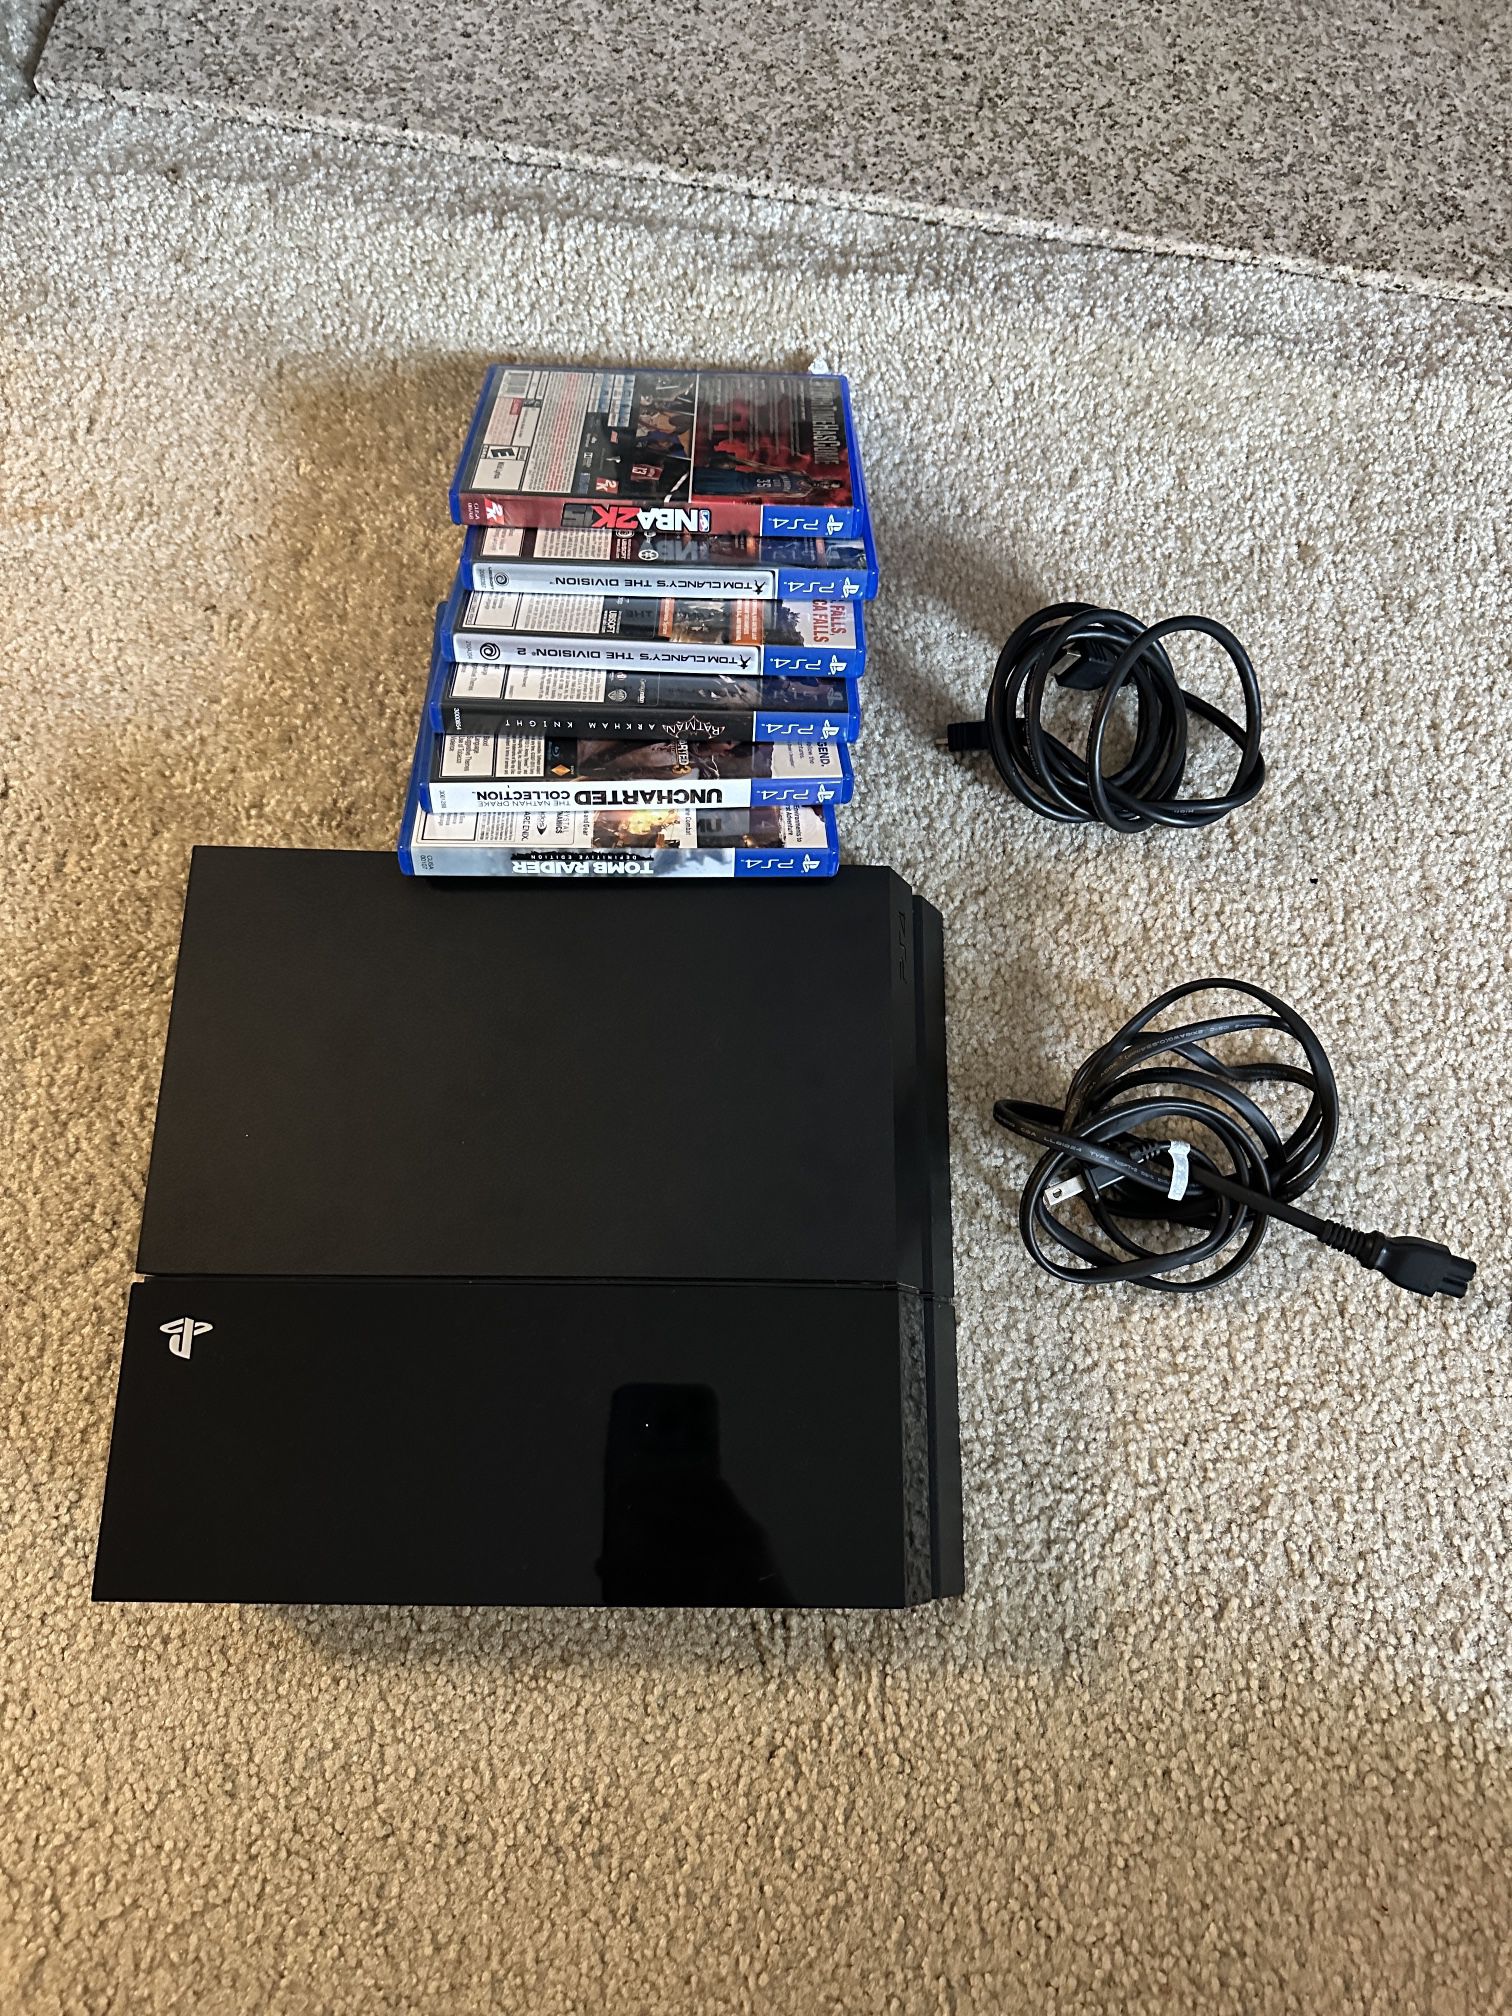 PS4 Console System -still available 